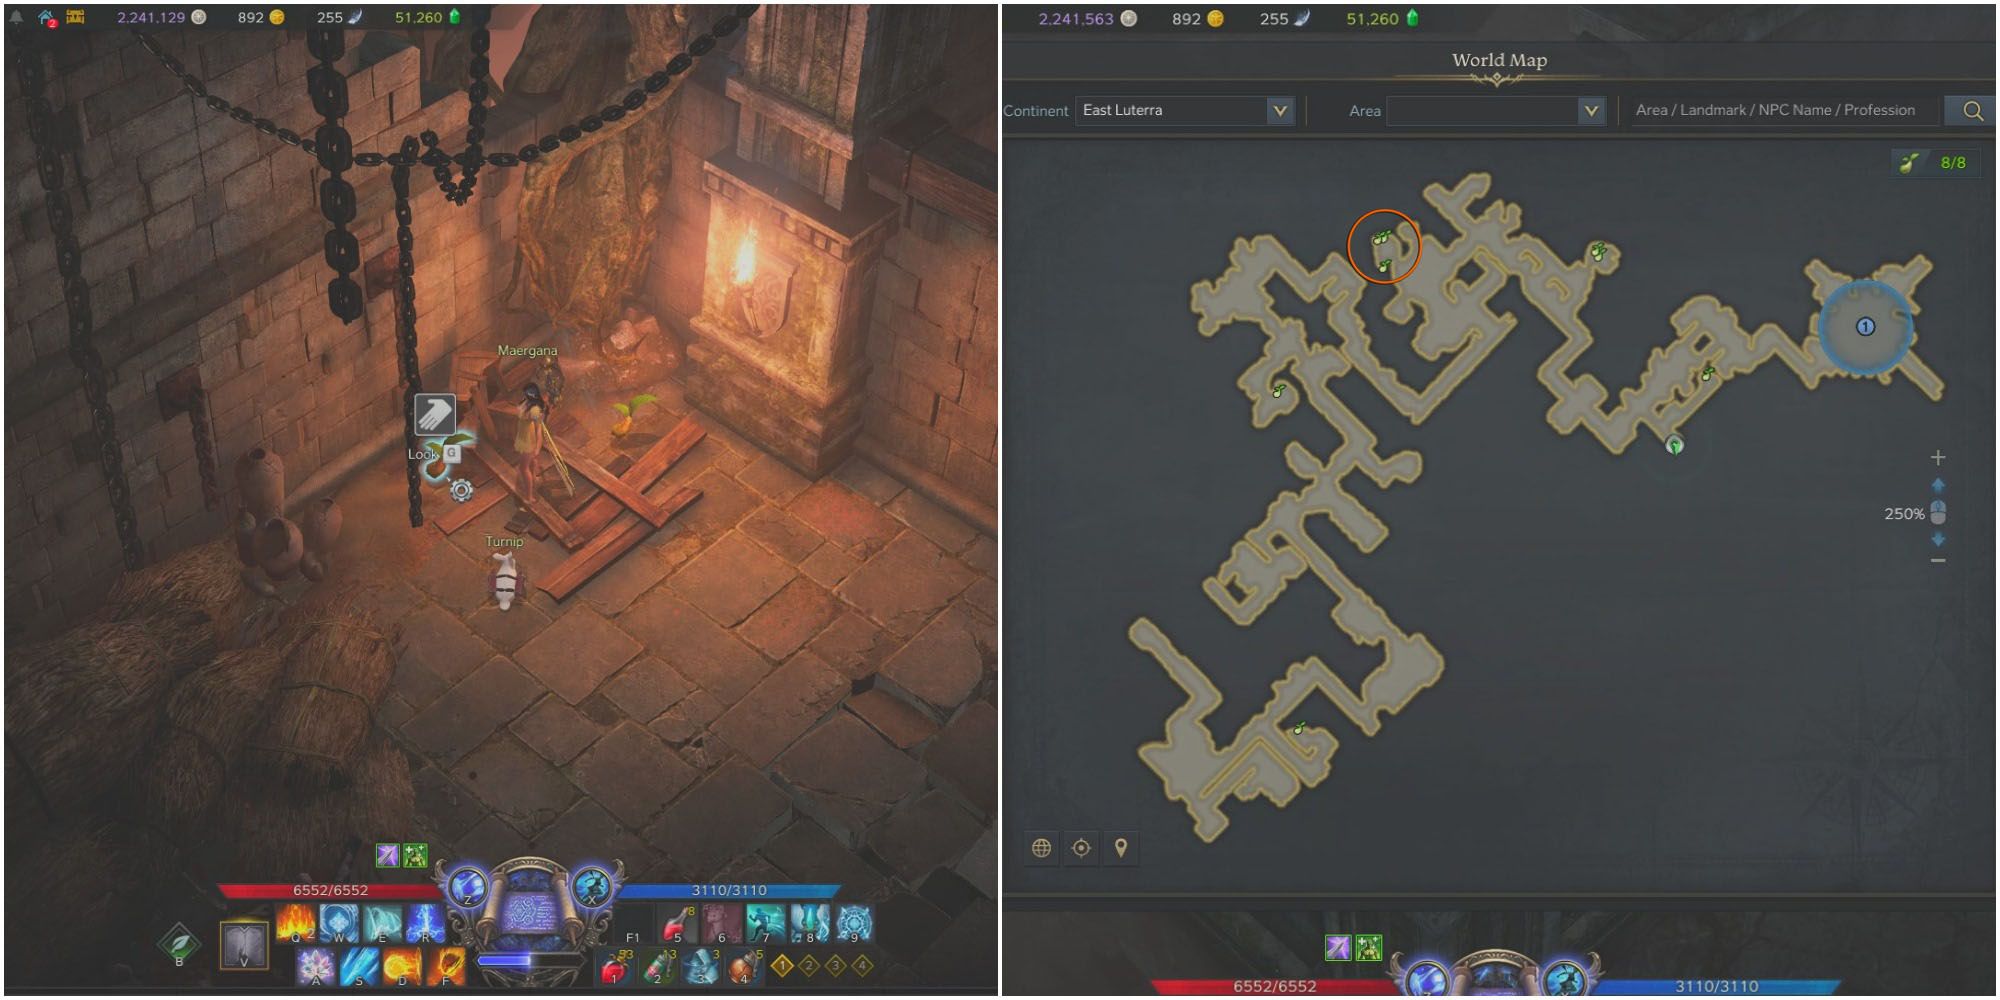 split image of player finding Mokoko Seed 4 in jail cell and map of blackrose basement